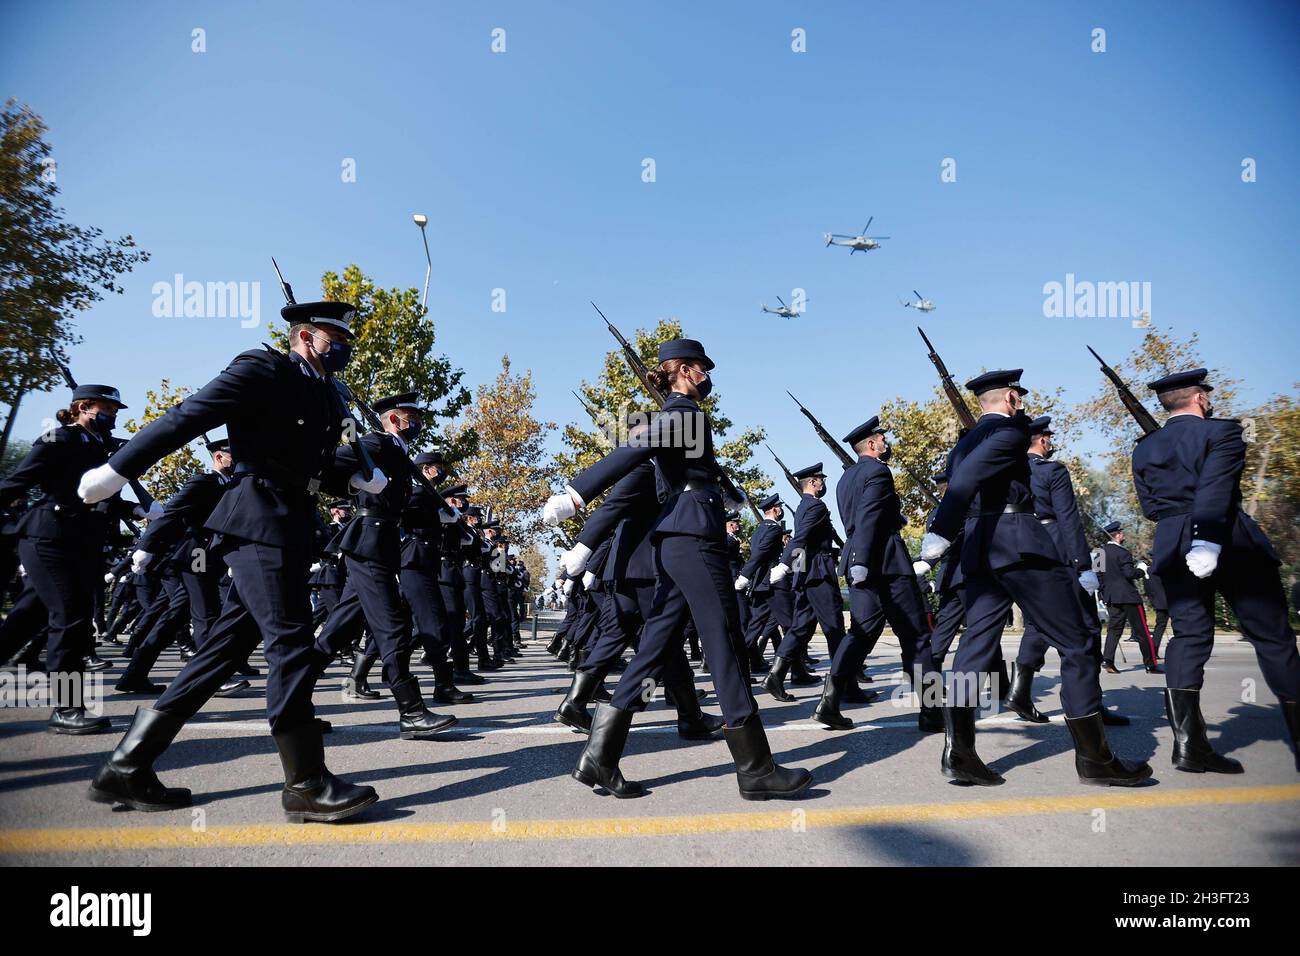 Thessaloniki, Greece. 28th Oct, 2021. Police march during a military parade in Thessaloniki, northern Greece, on Oct. 28, 2021. Amid COVID-19 restrictions especially in the northern part of the country, Greece celebrated the annual 'Ochi (No) Day' on Thursday with military and student parades. Credit: Dimitris Tosidis/Xinhua/Alamy Live News Stock Photo